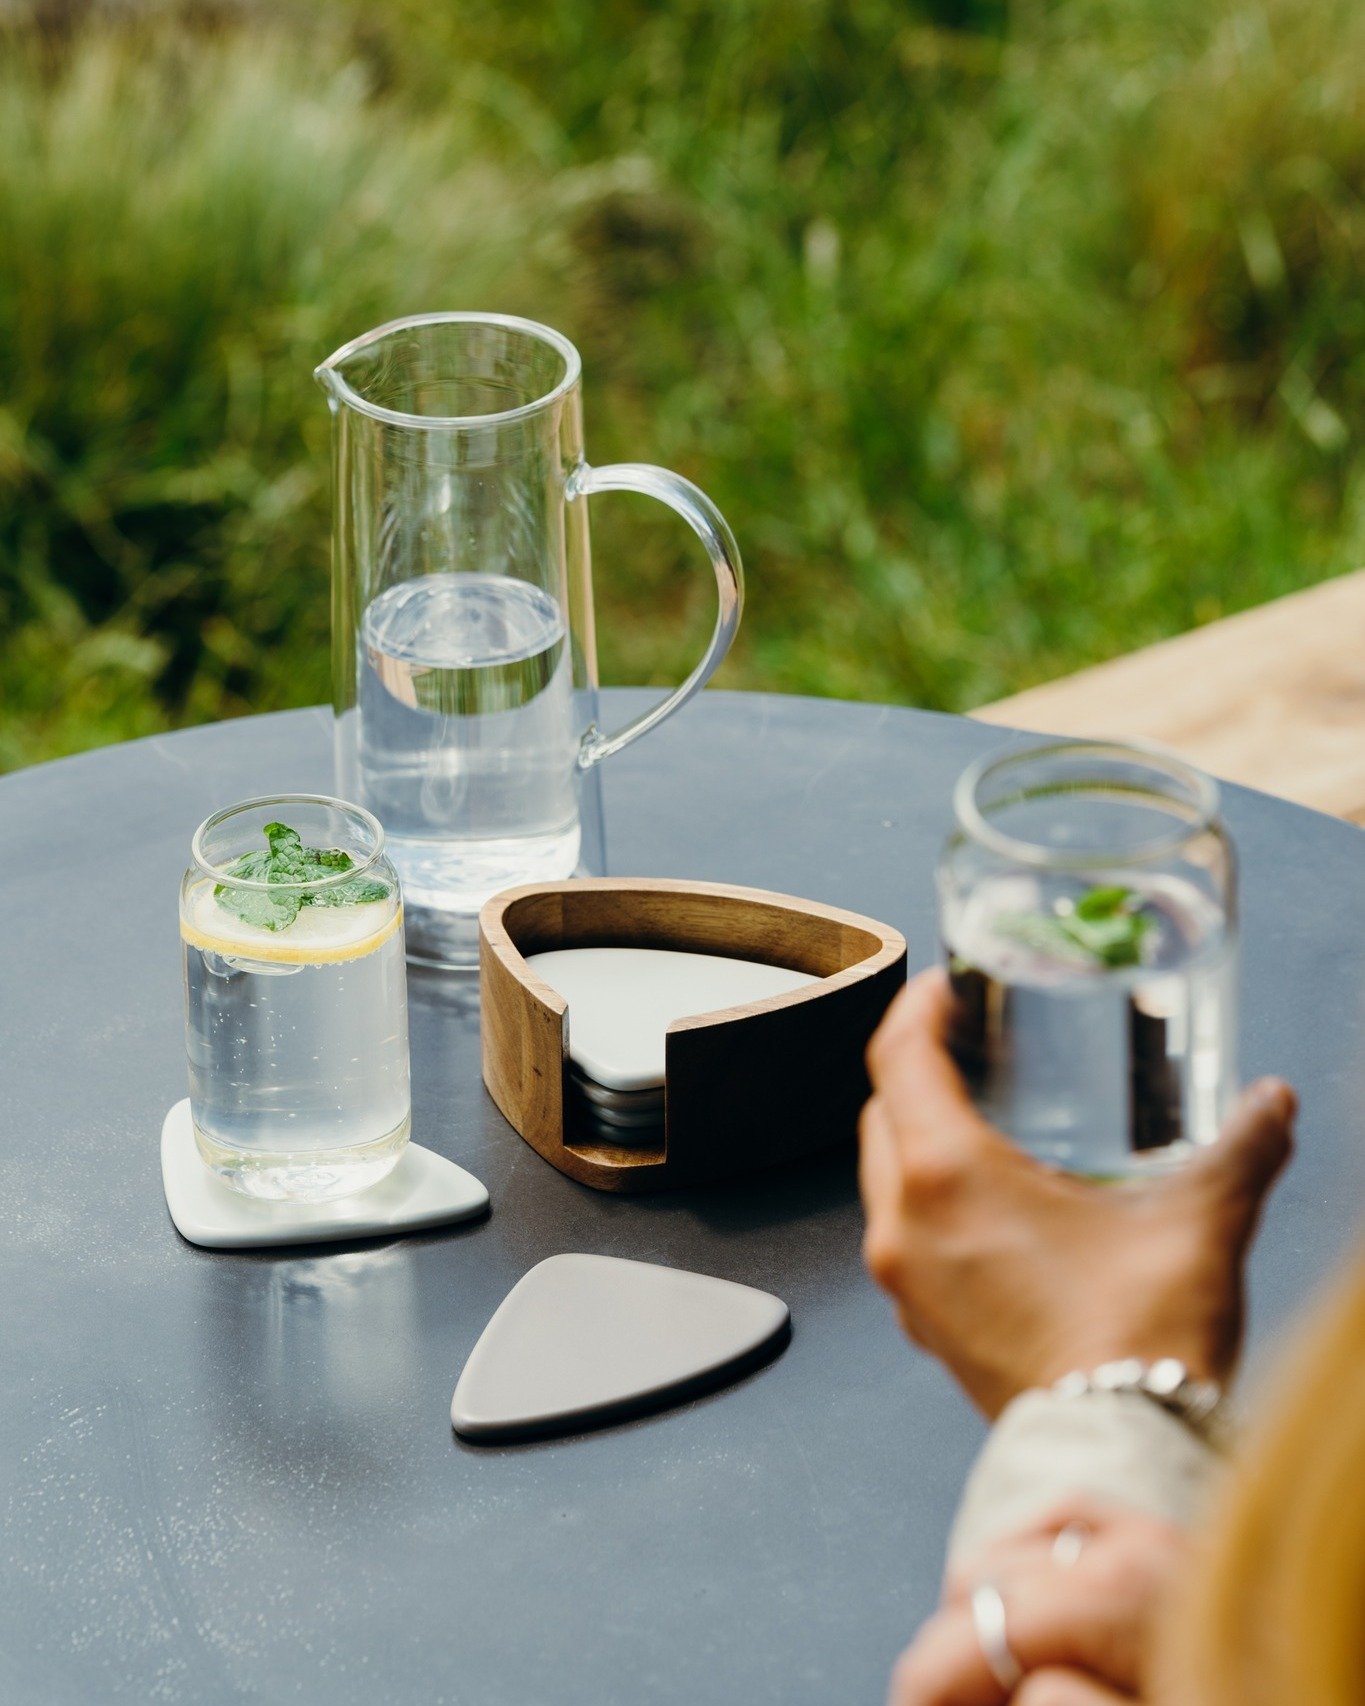 An essential item for your everyday needs, Keepsake Collection&rsquo;s Onsen Water Jug is a stylish but classic addition to your home or work life.

Complete your Keepsake Collection by pairing it with the Suburbia Glass and Pebble Coaster Set.